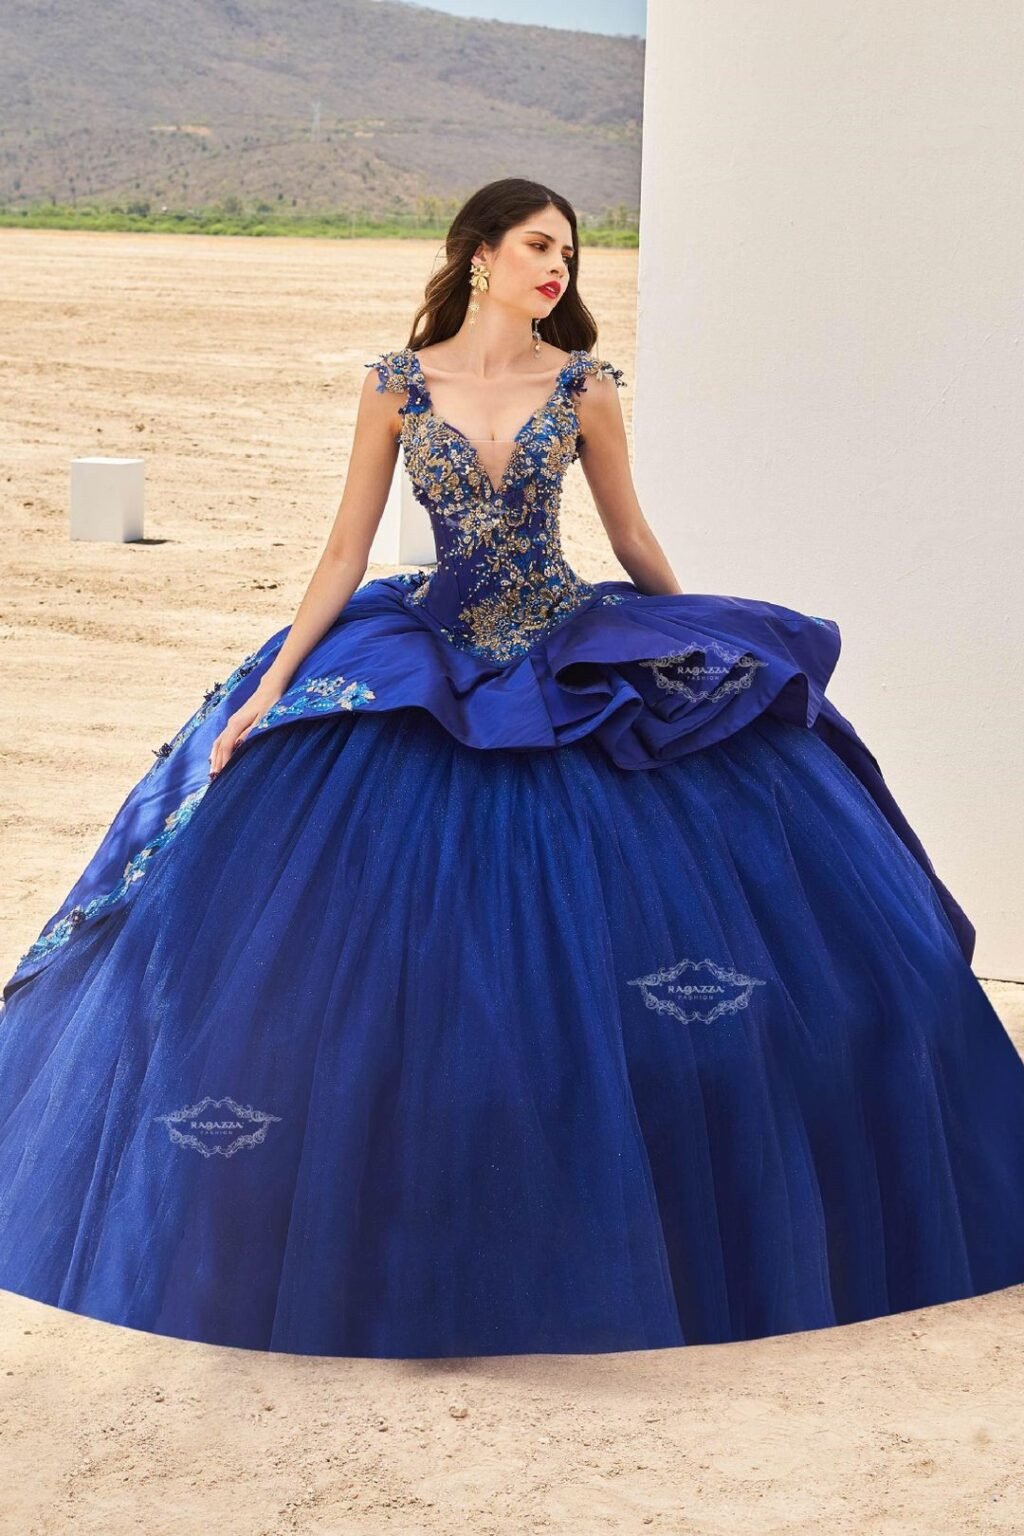 Blue Quince Dress Ideas Looks Creative Touch Mixcrix 2618